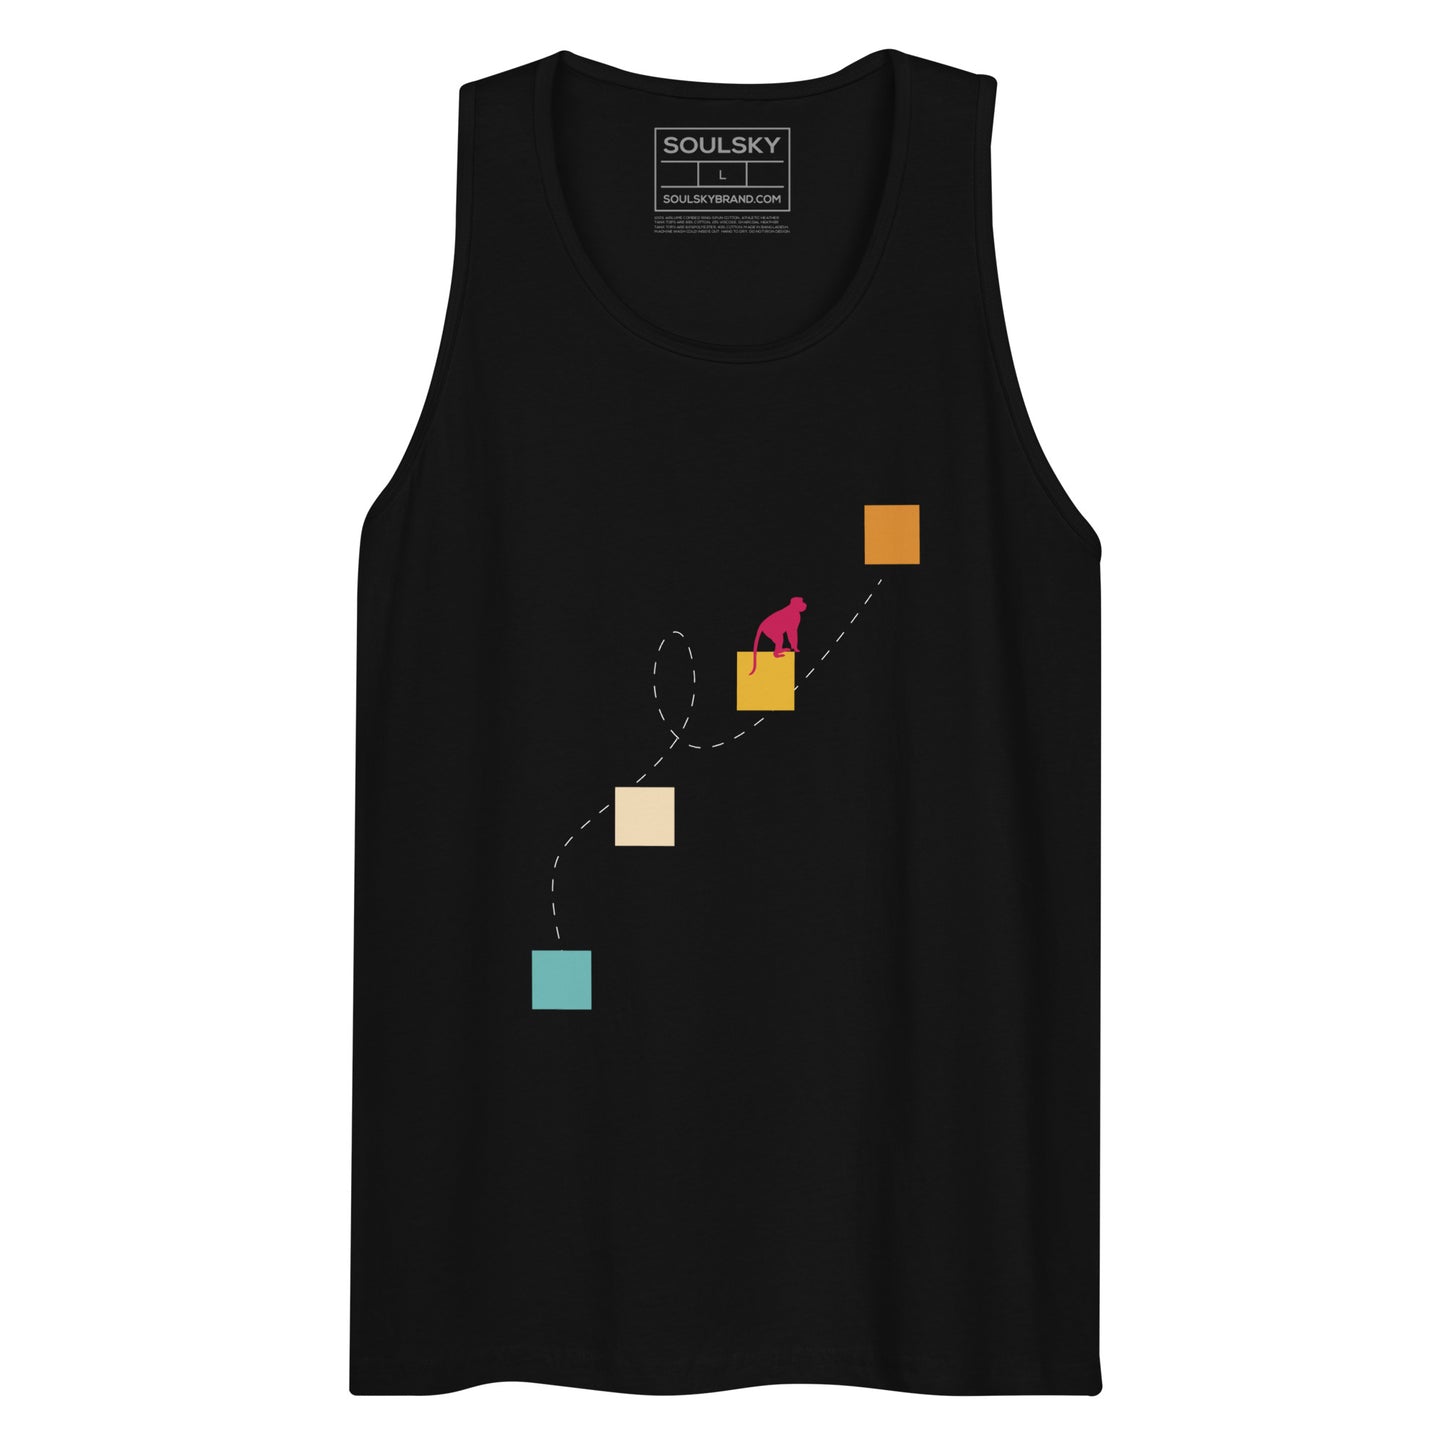 NEVER GIVE UP Premium Tank Top